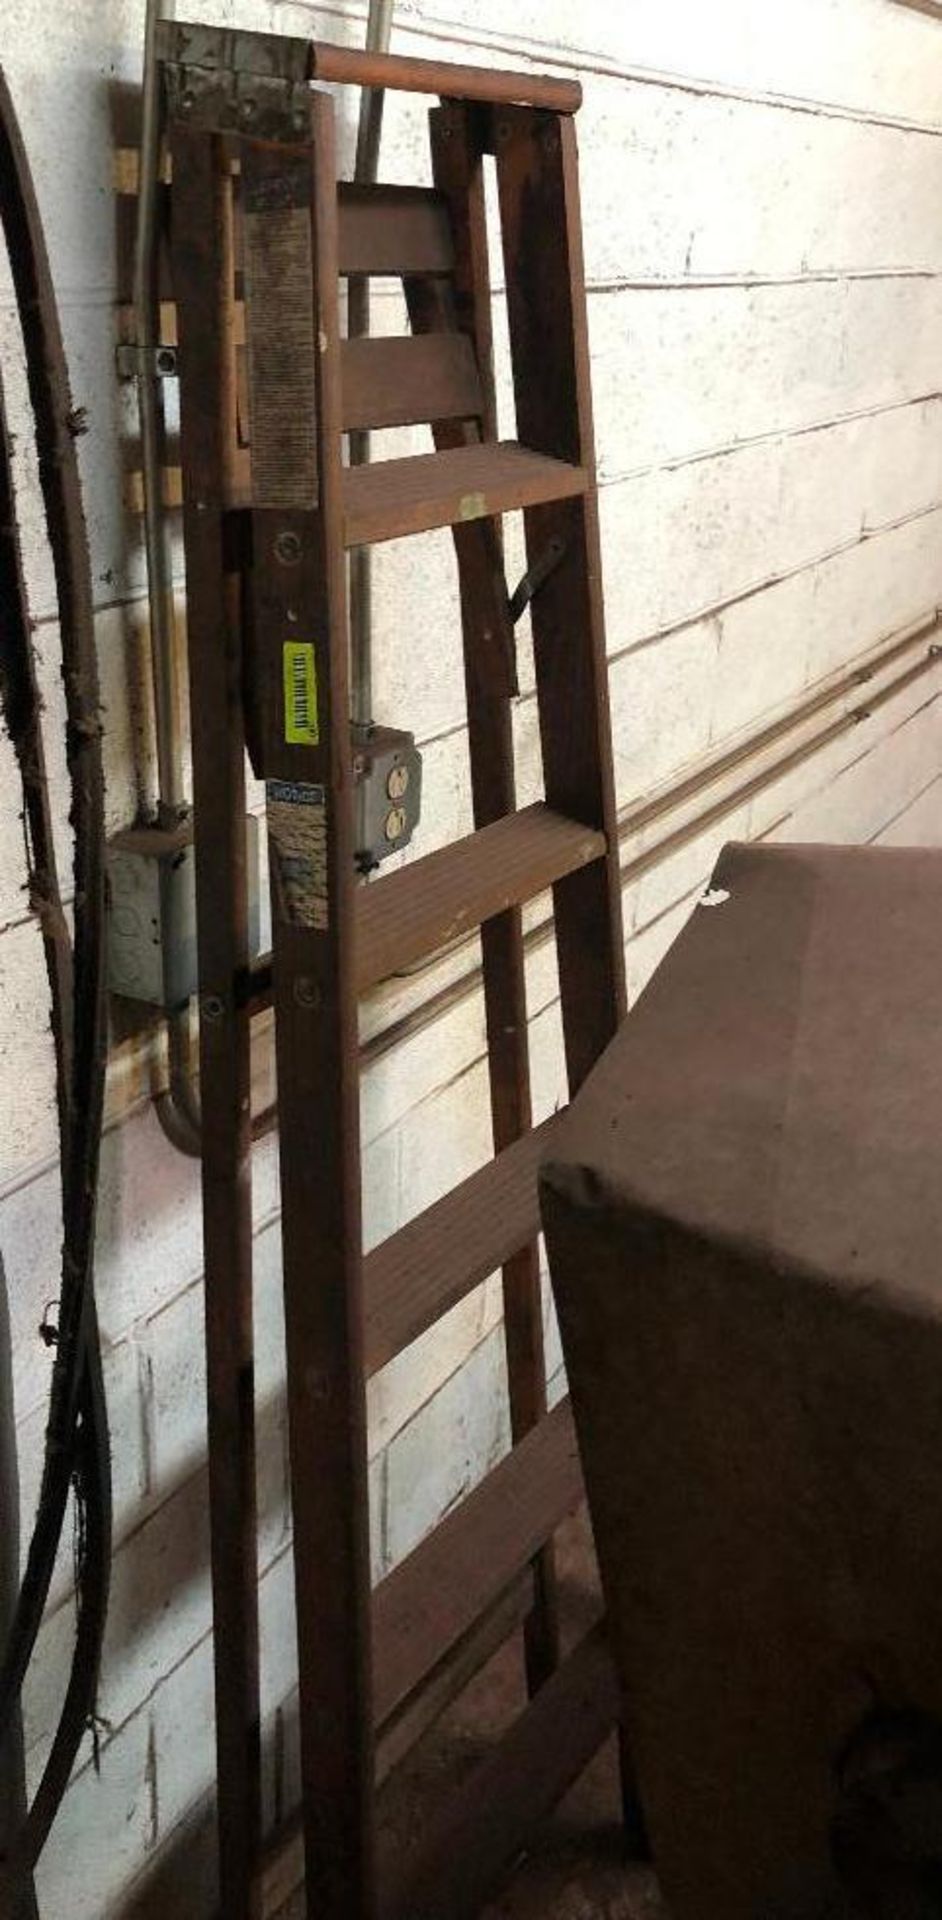 DESCRIPTION: 6' WOODEN LADDER ADDITIONAL INFORMATION: 200 LB. CAPACITY SIZE: 6' LOCATION: WAREHOUSE